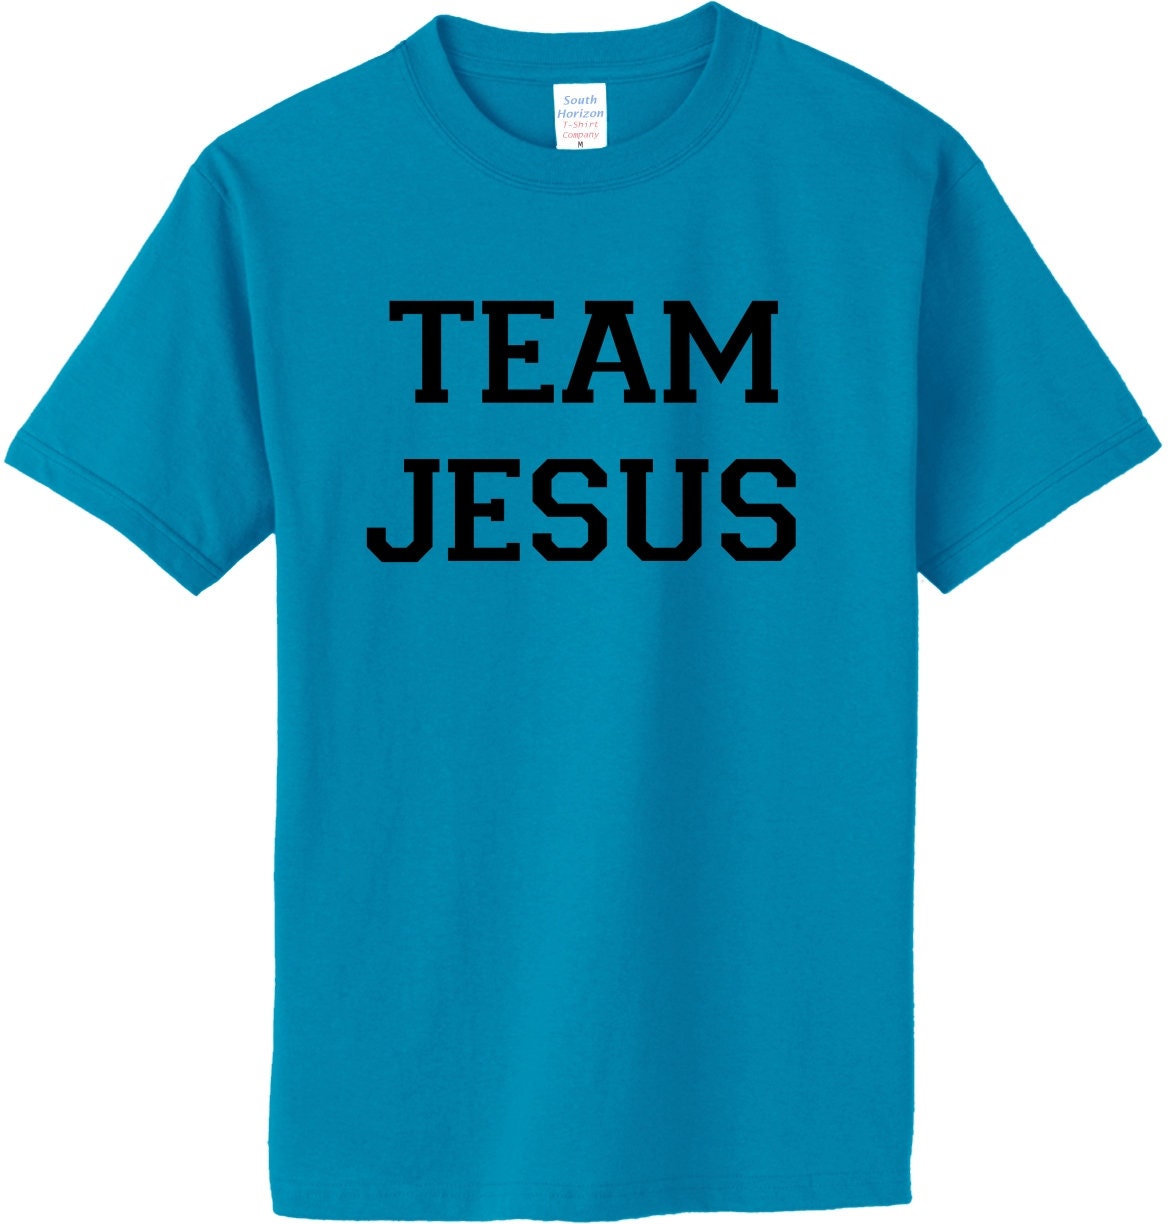 Team Jesus on Adult & Youth Cotton T-Shirt 9 Colors | Etsy